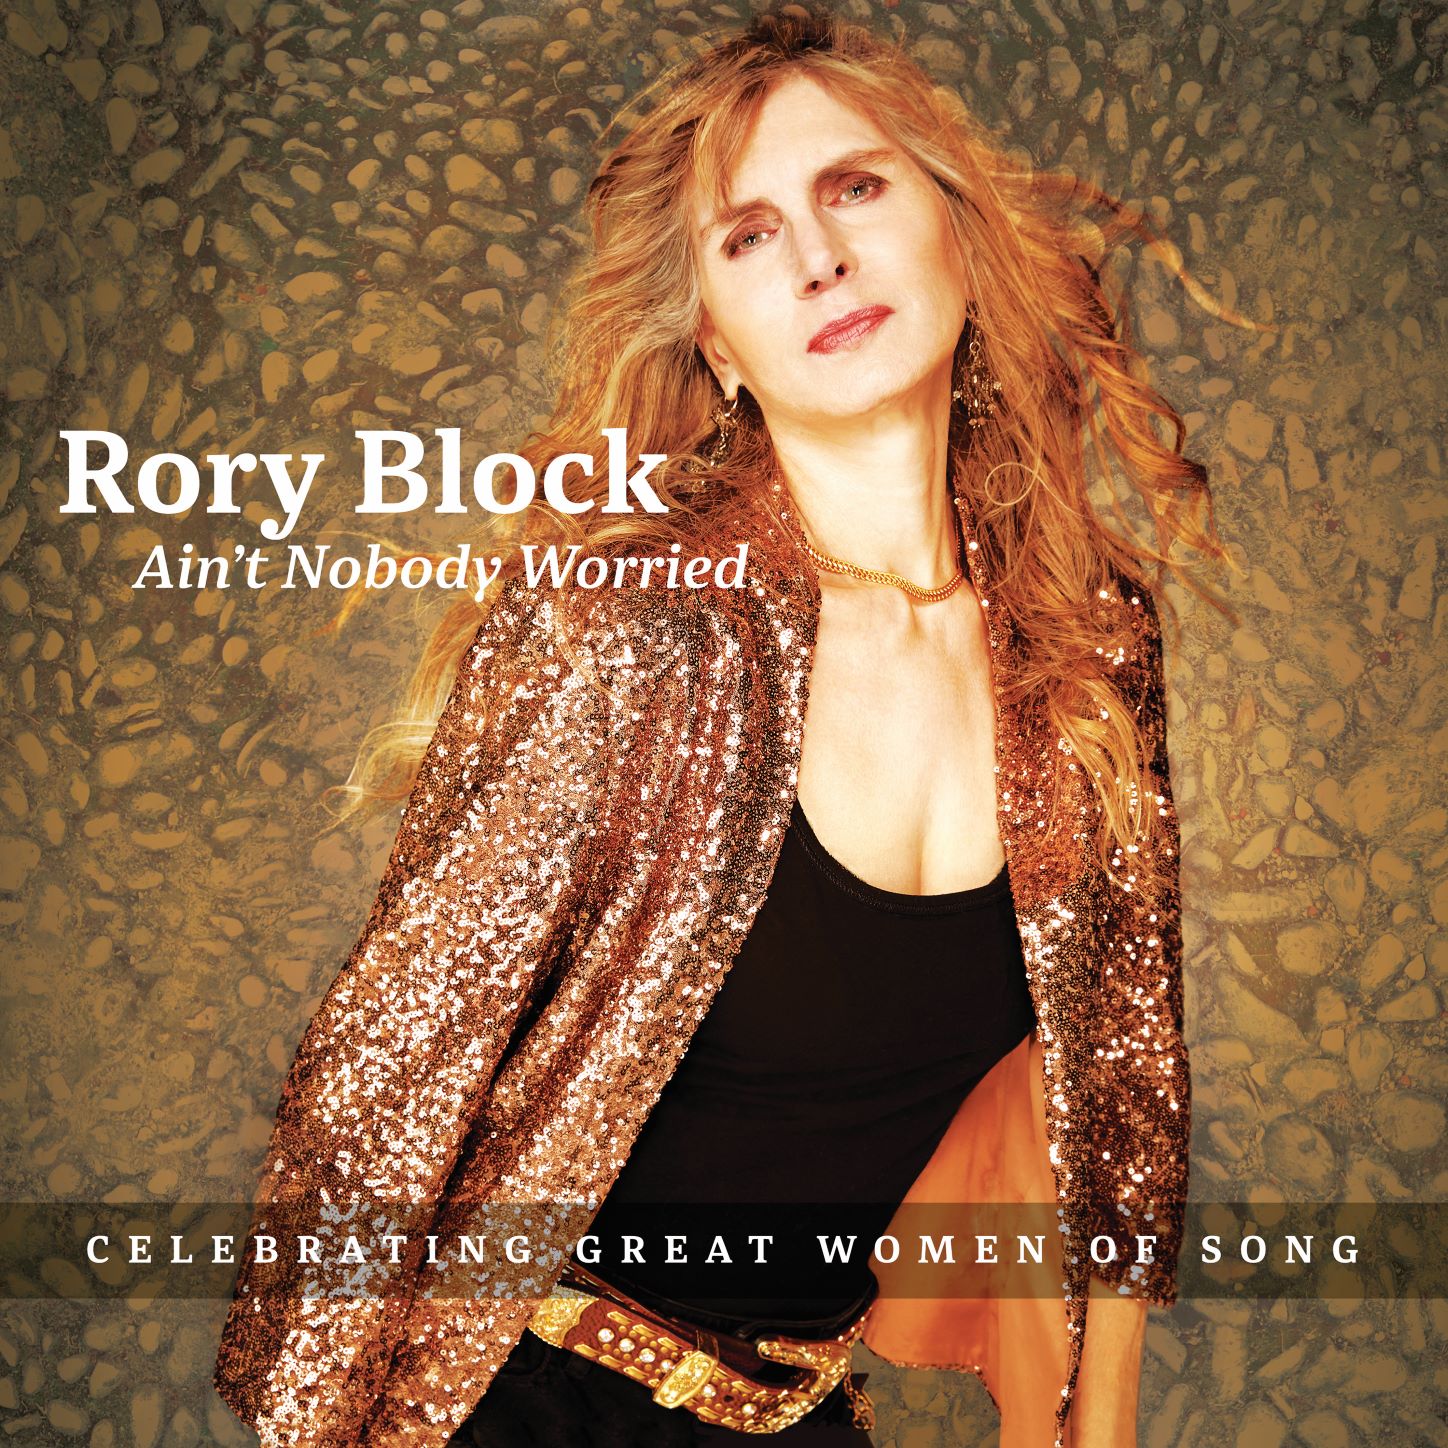 RORY BLOCK Set to Release Her New Album, Ain't Nobody Worried, October 7